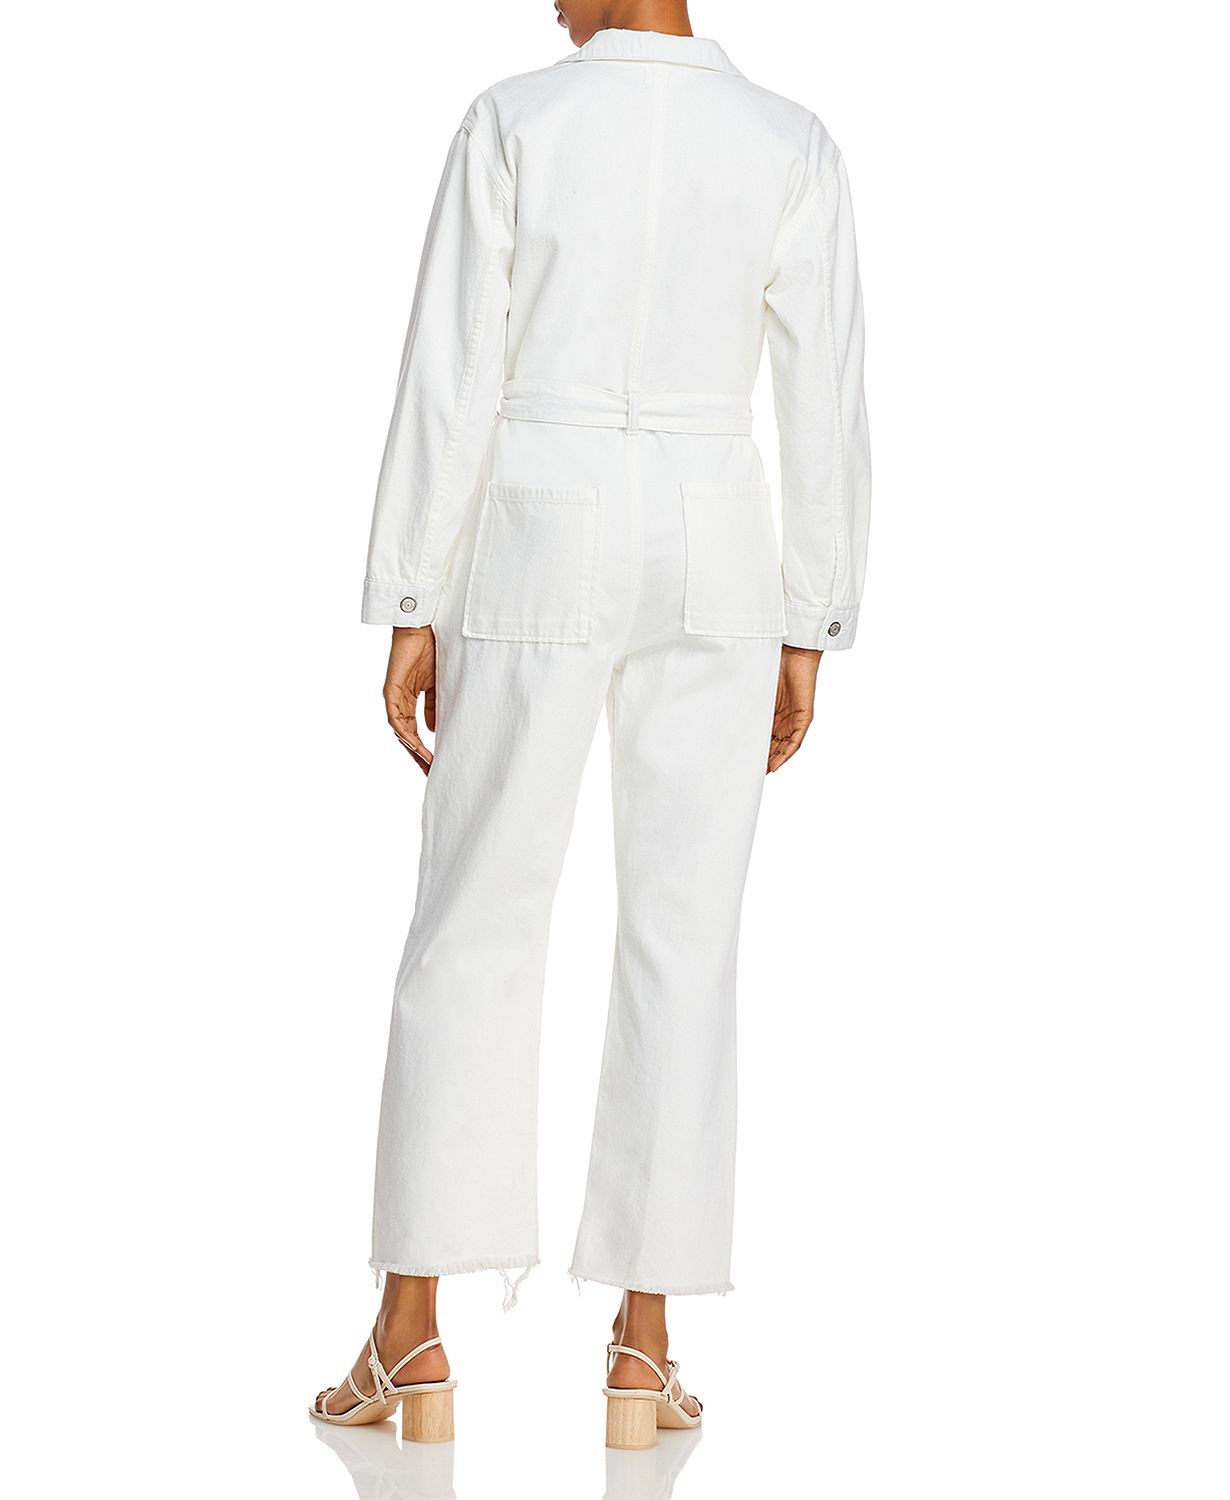 woocommerce-673321-2209615.cloudwaysapps.com-boyish-womens-white-the-guy-belted-frayed-hem-coveralls-jumpsuit